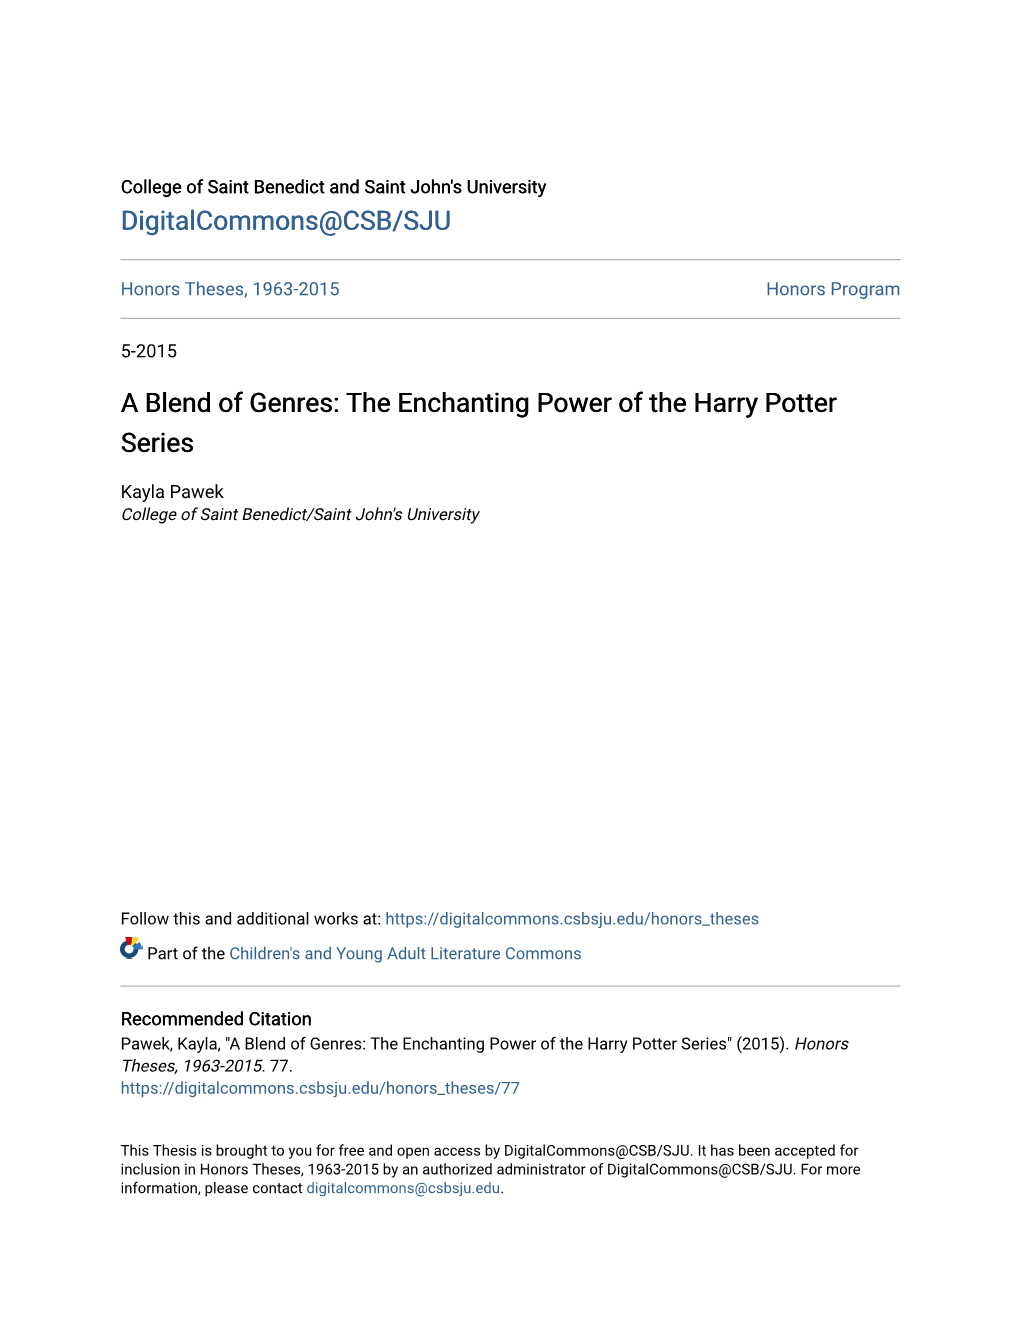 A Blend of Genres: the Enchanting Power of the Harry Potter Series